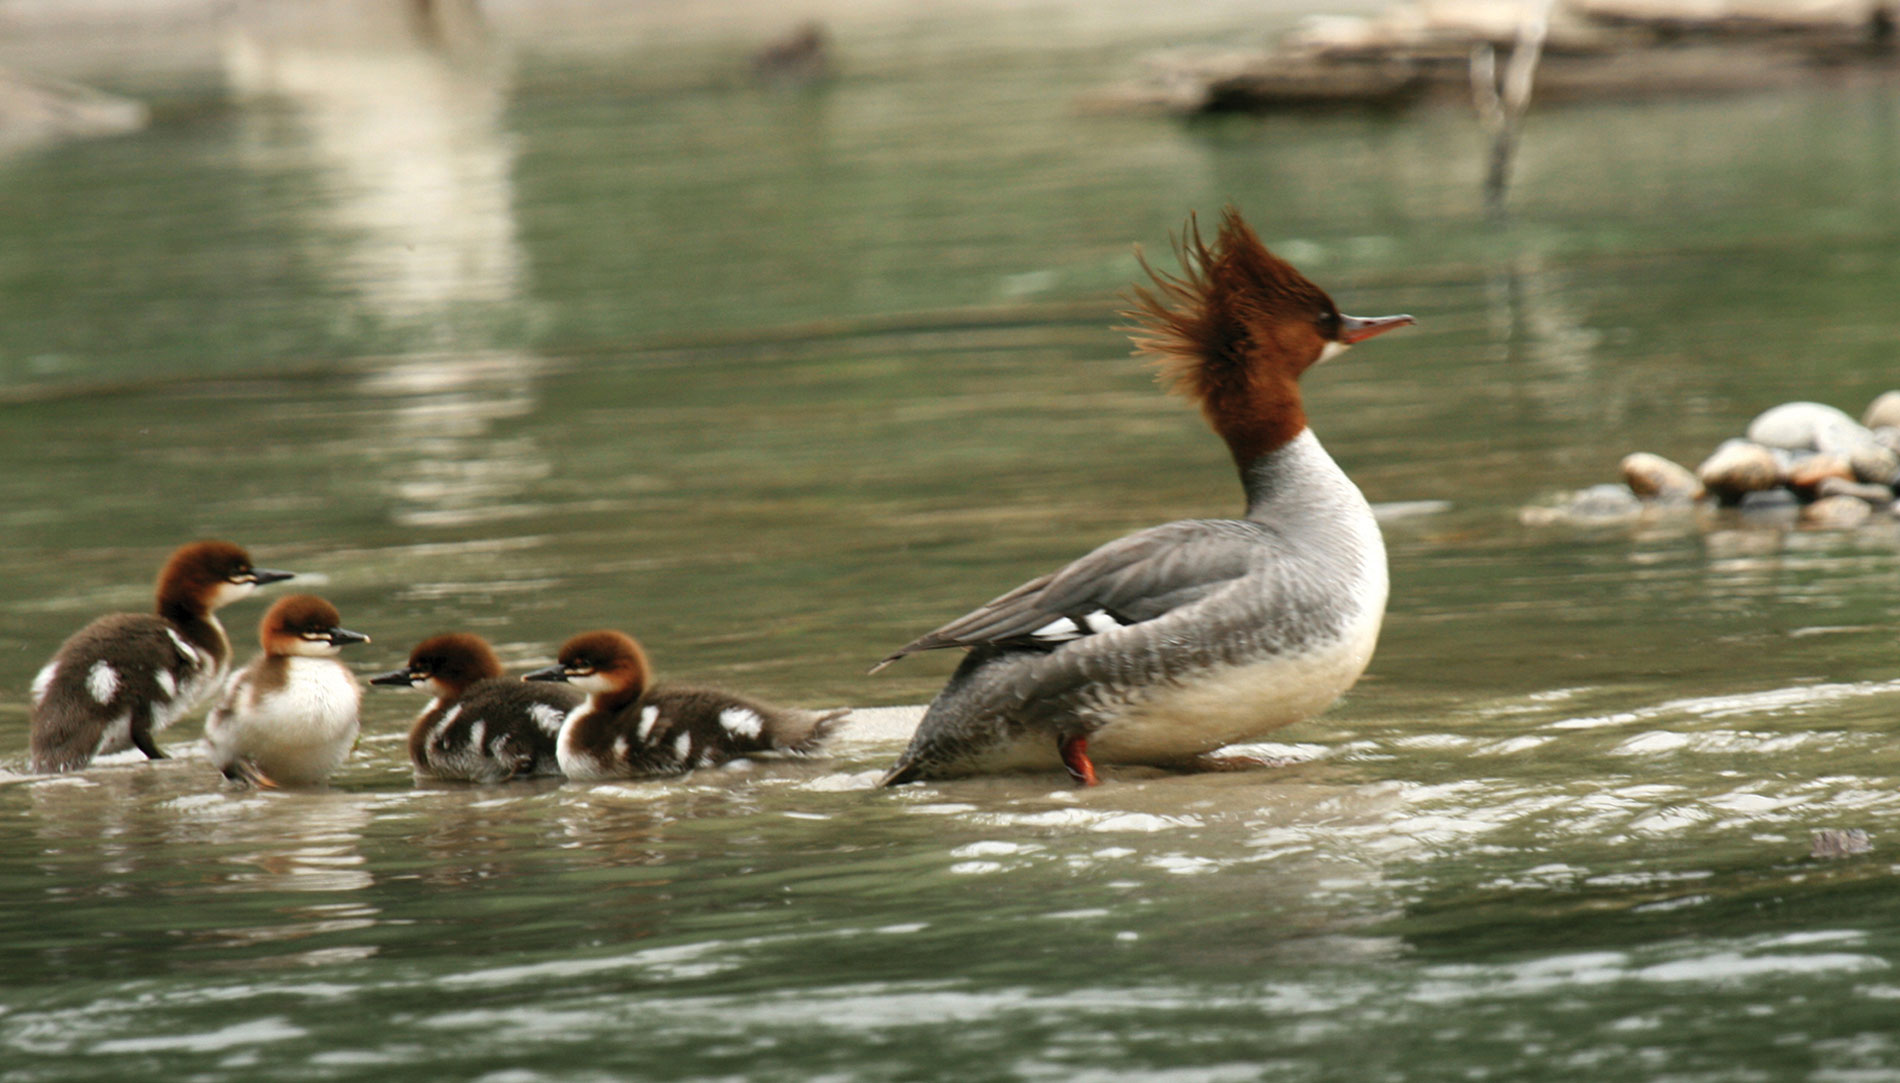 A Merganser duck and ducklings near the Chilkoot Trail